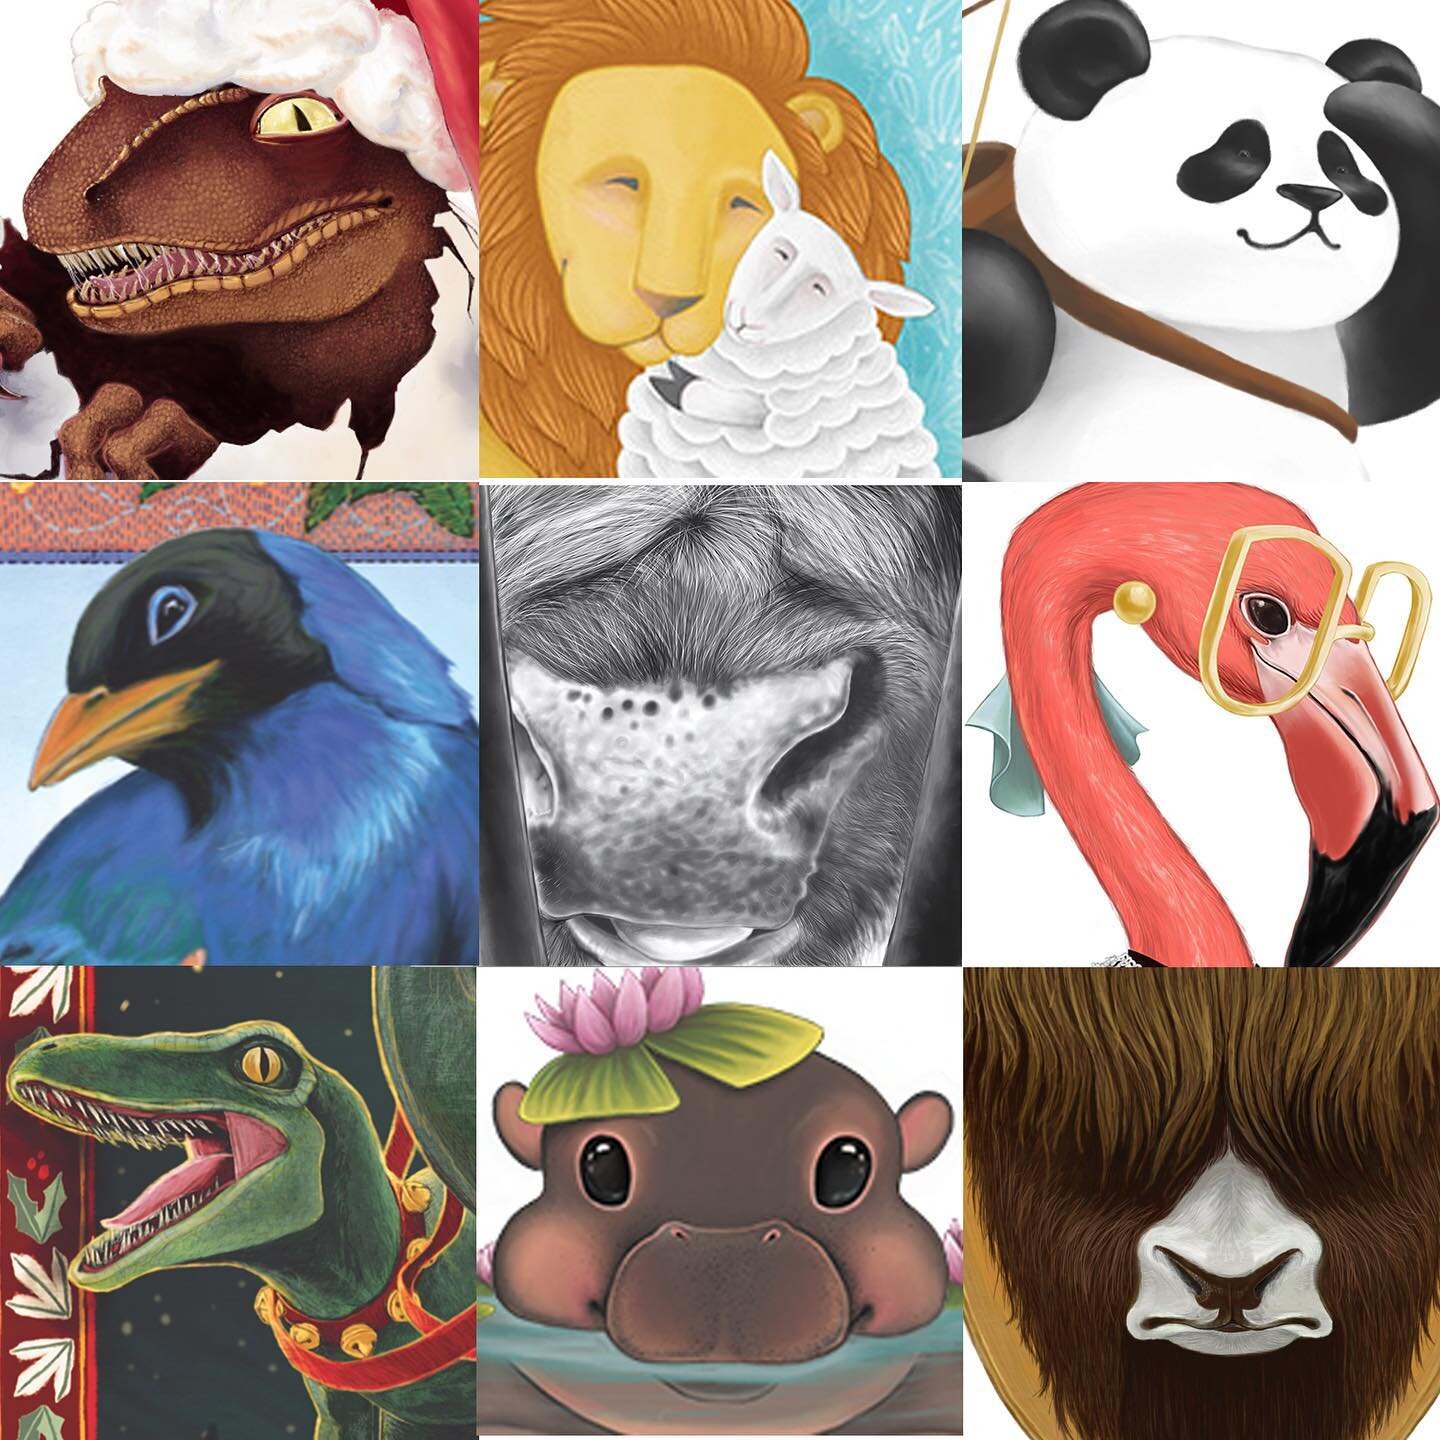 I panicked and divided my #faceyourart2020 challenge into two sections - human and animal. Things I learned while doing this.... 1. I need to complete more drawings. I have too many half doodles. 2. I tend to lean towards drawing dinosaurs and cows. 